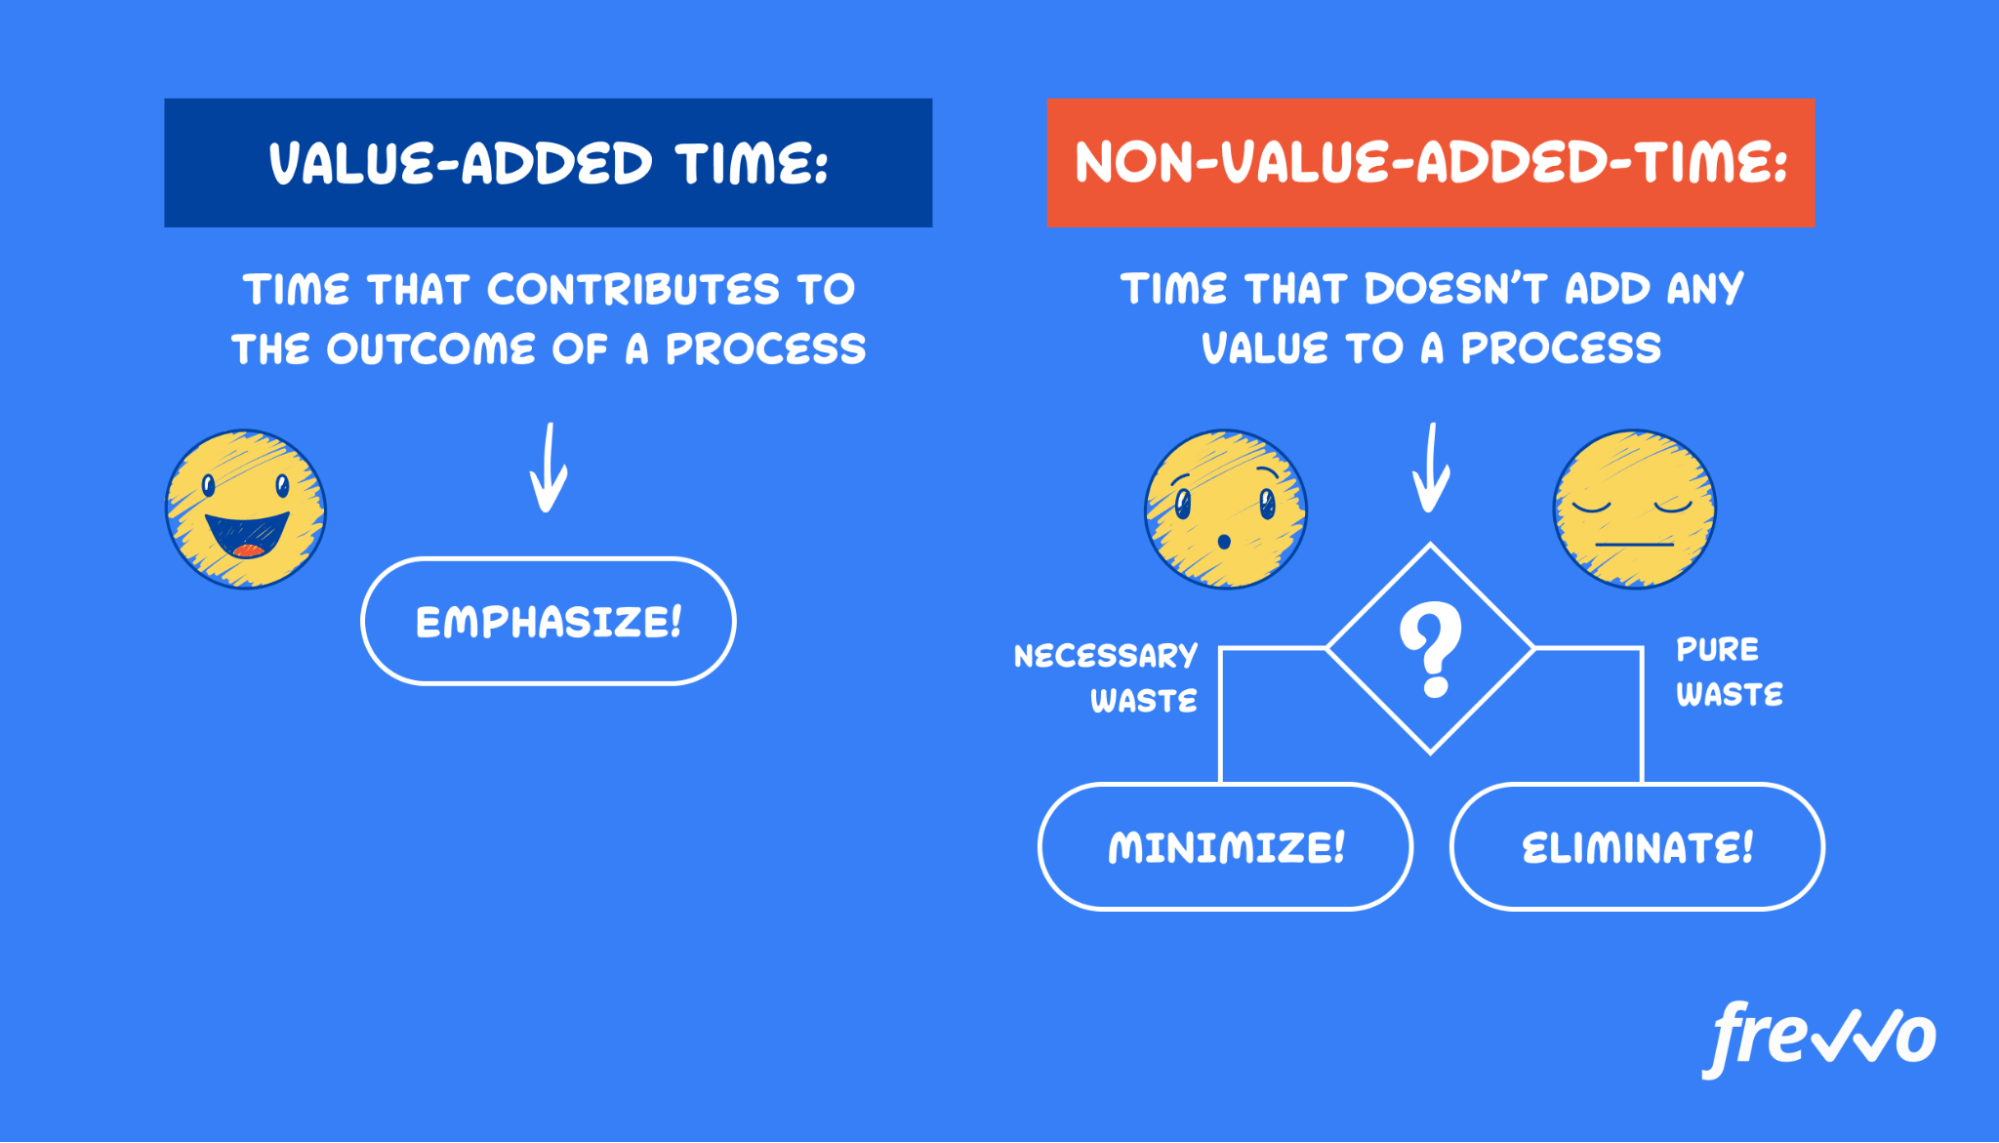 Value-added time vs non-value-added-time